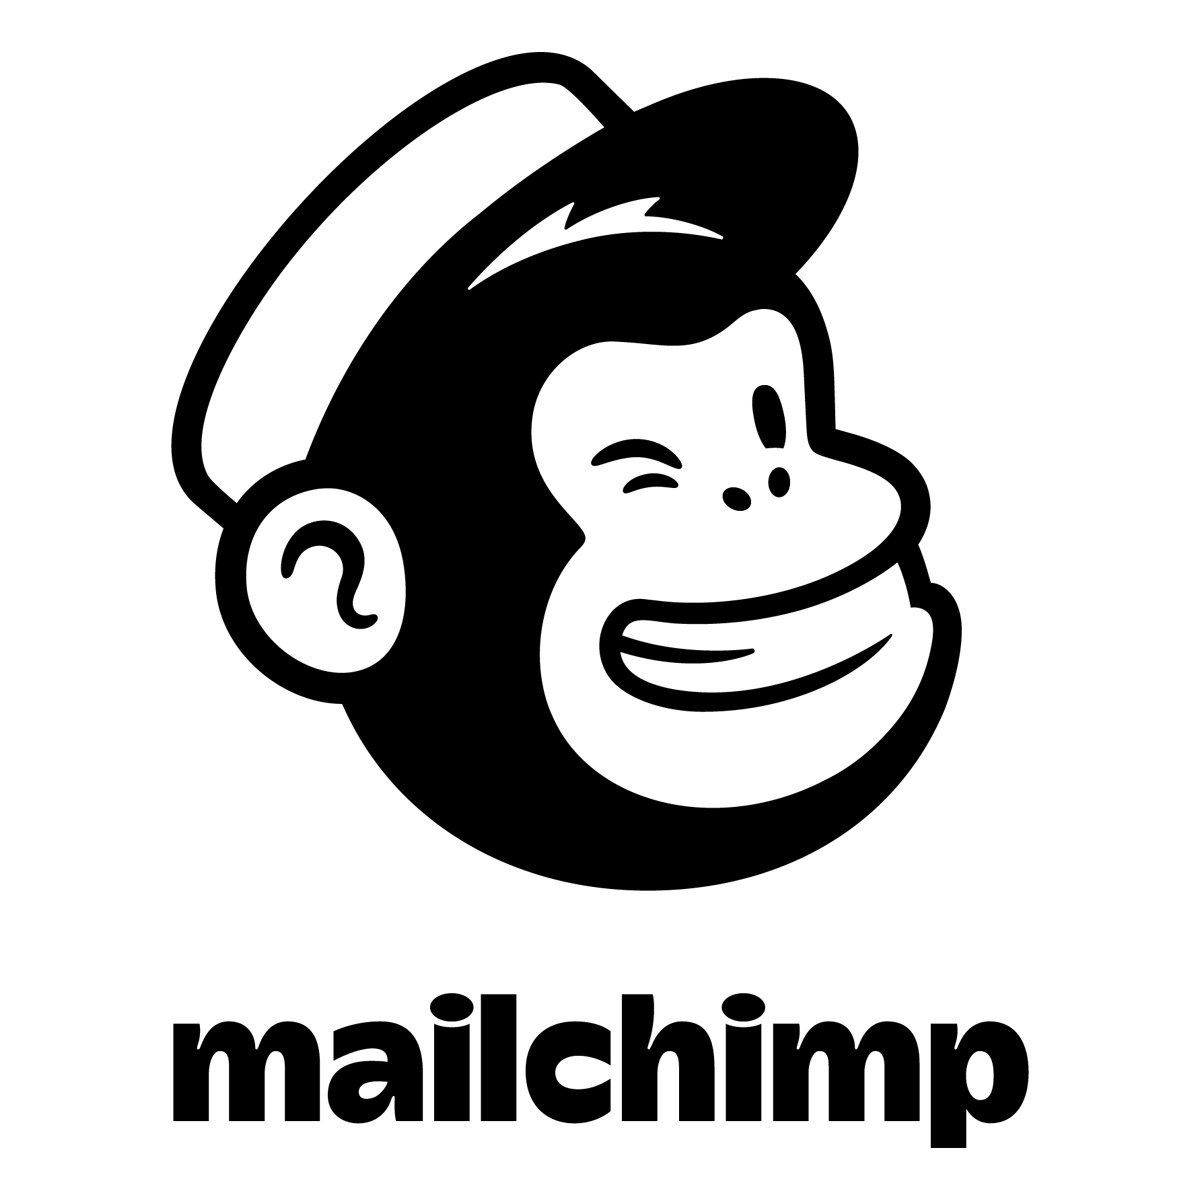 All In One Integrated Marketing Platform For Small Business Pluspng.com  - Mailchimp, Transparent background PNG HD thumbnail